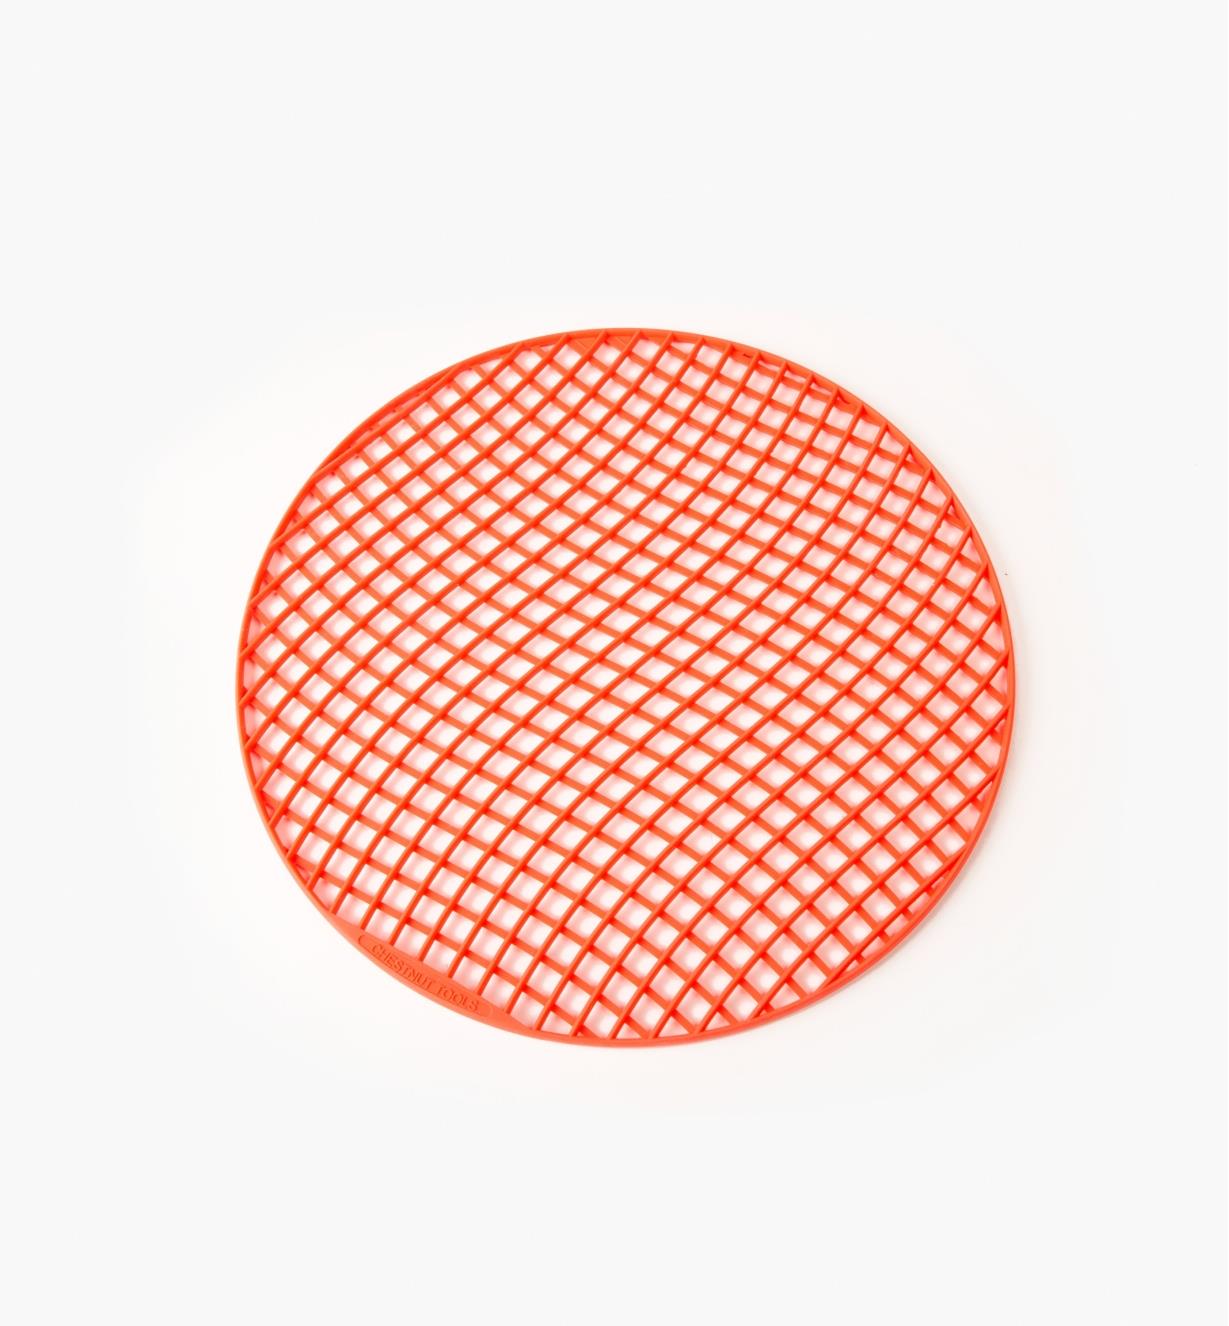 09A0426 - Silicone Canning Mat